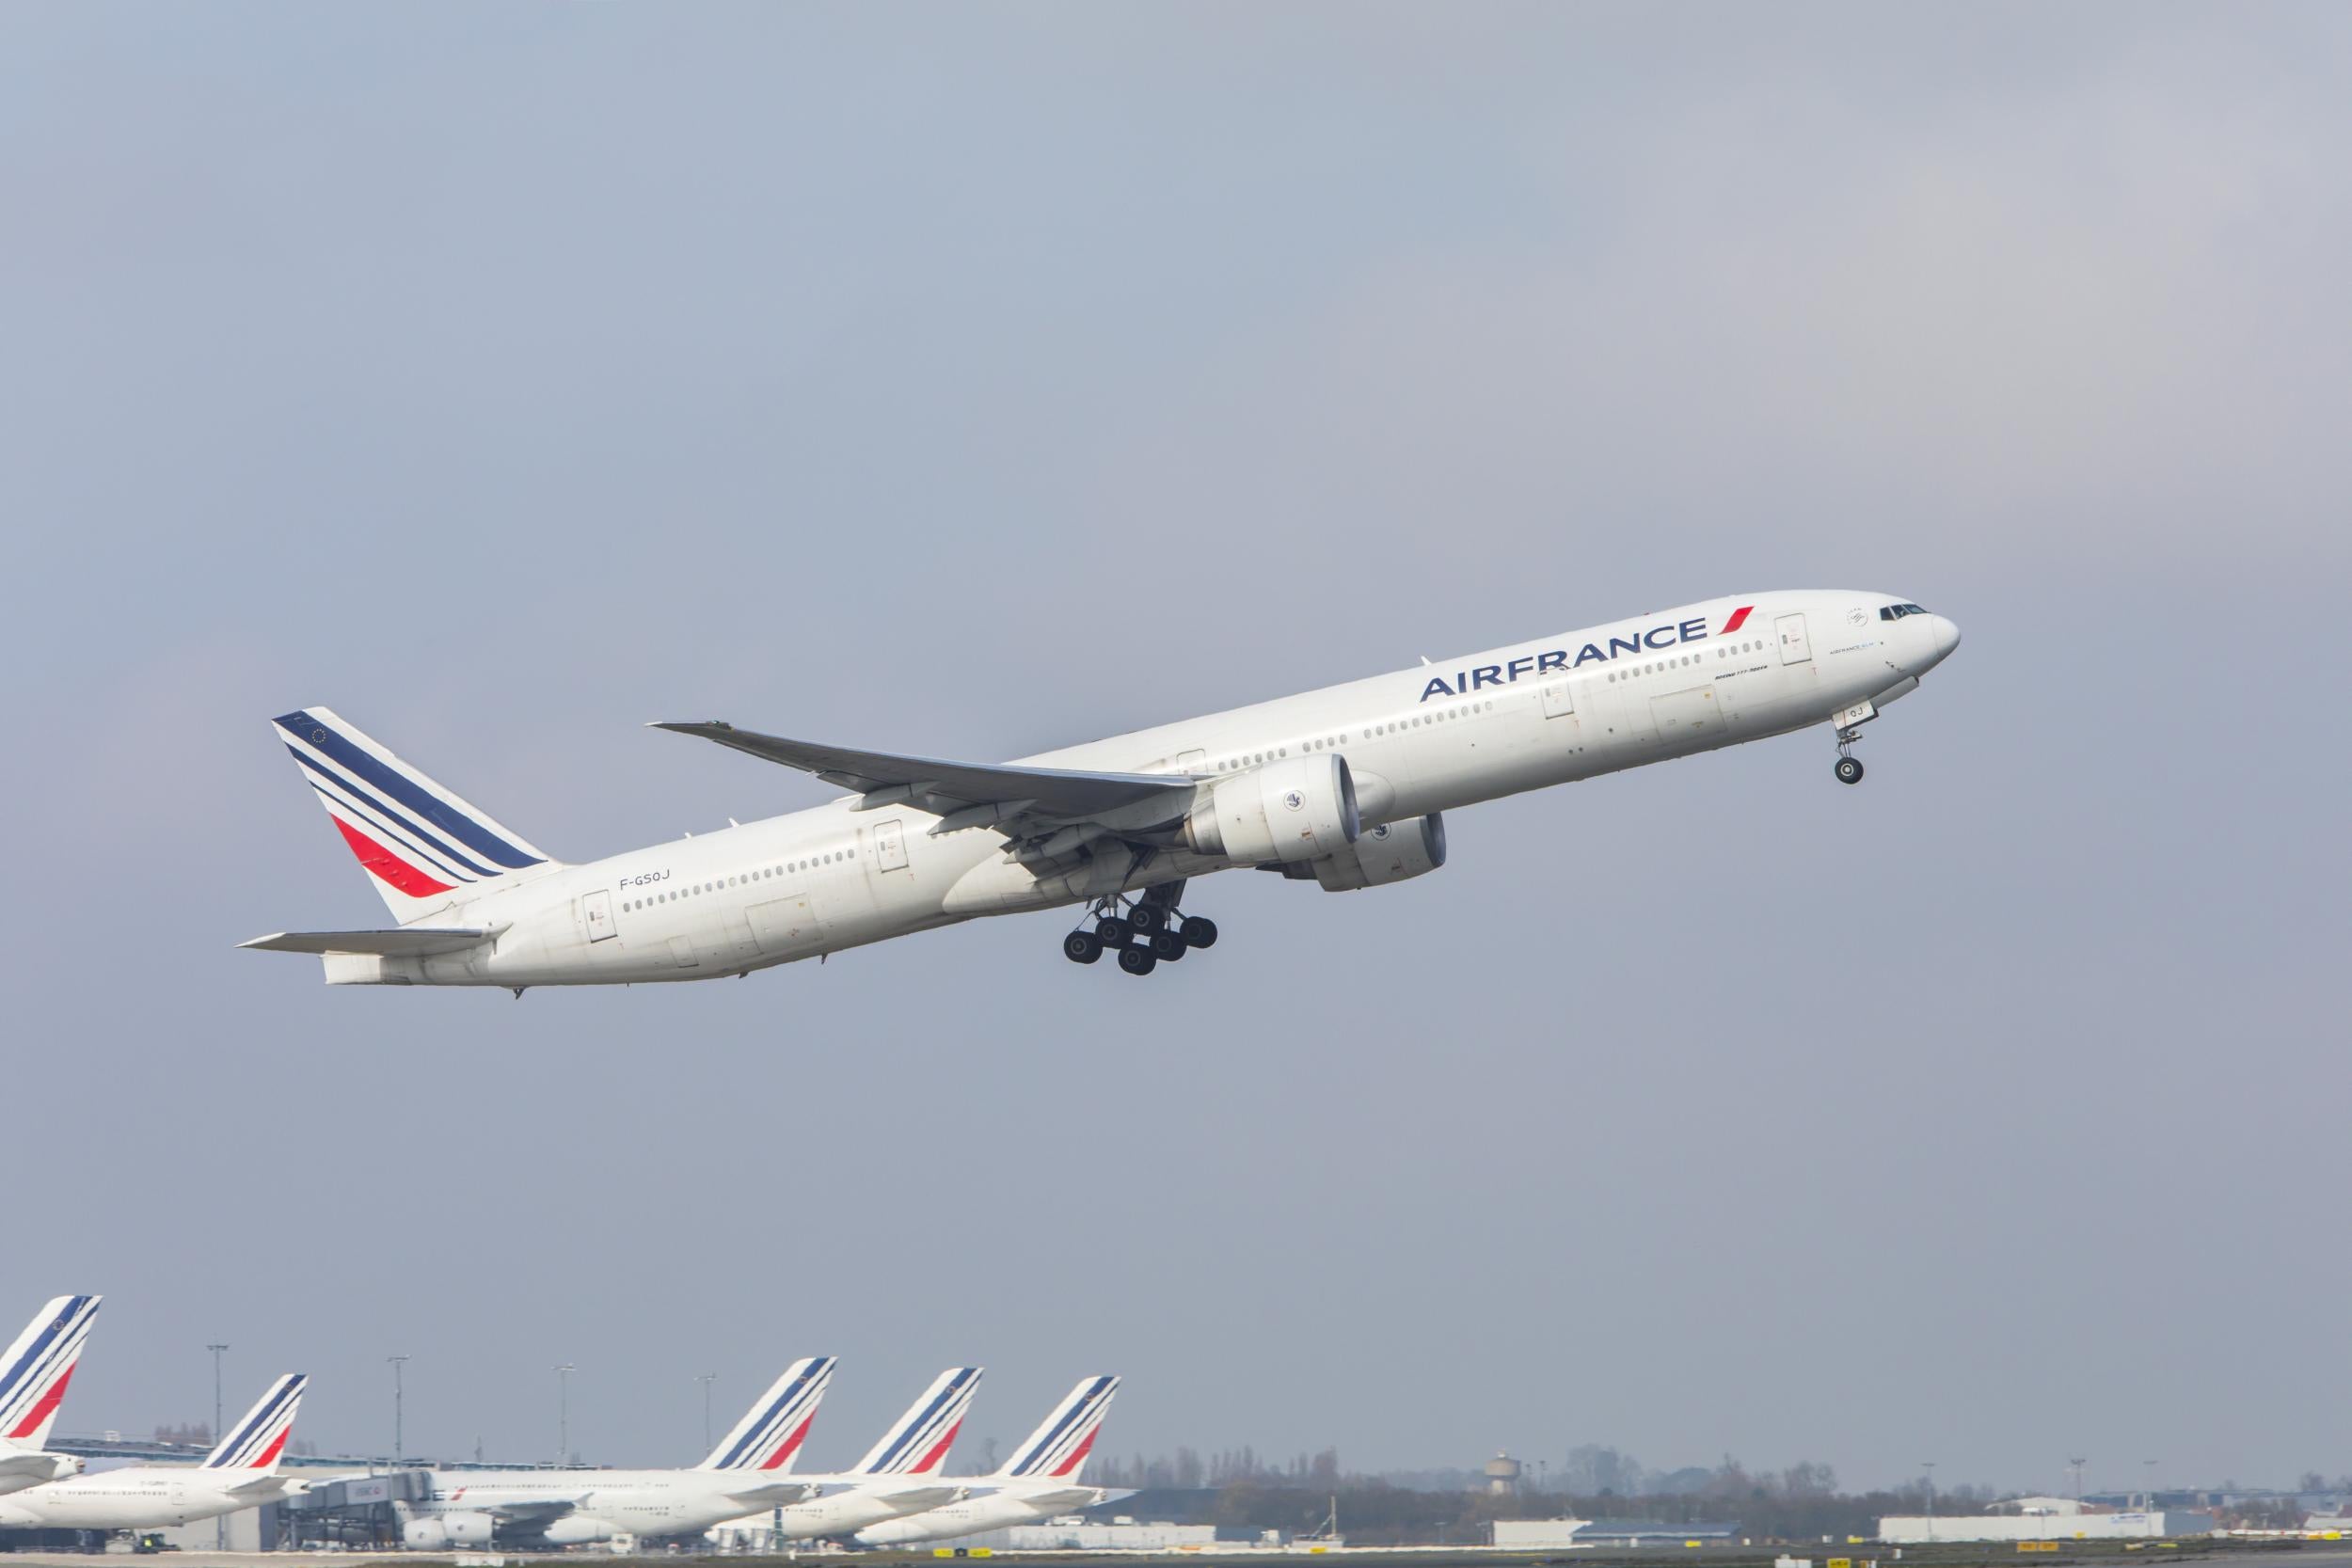 Going places? On strike days, Air France is cancelling around 30 per cent of departures